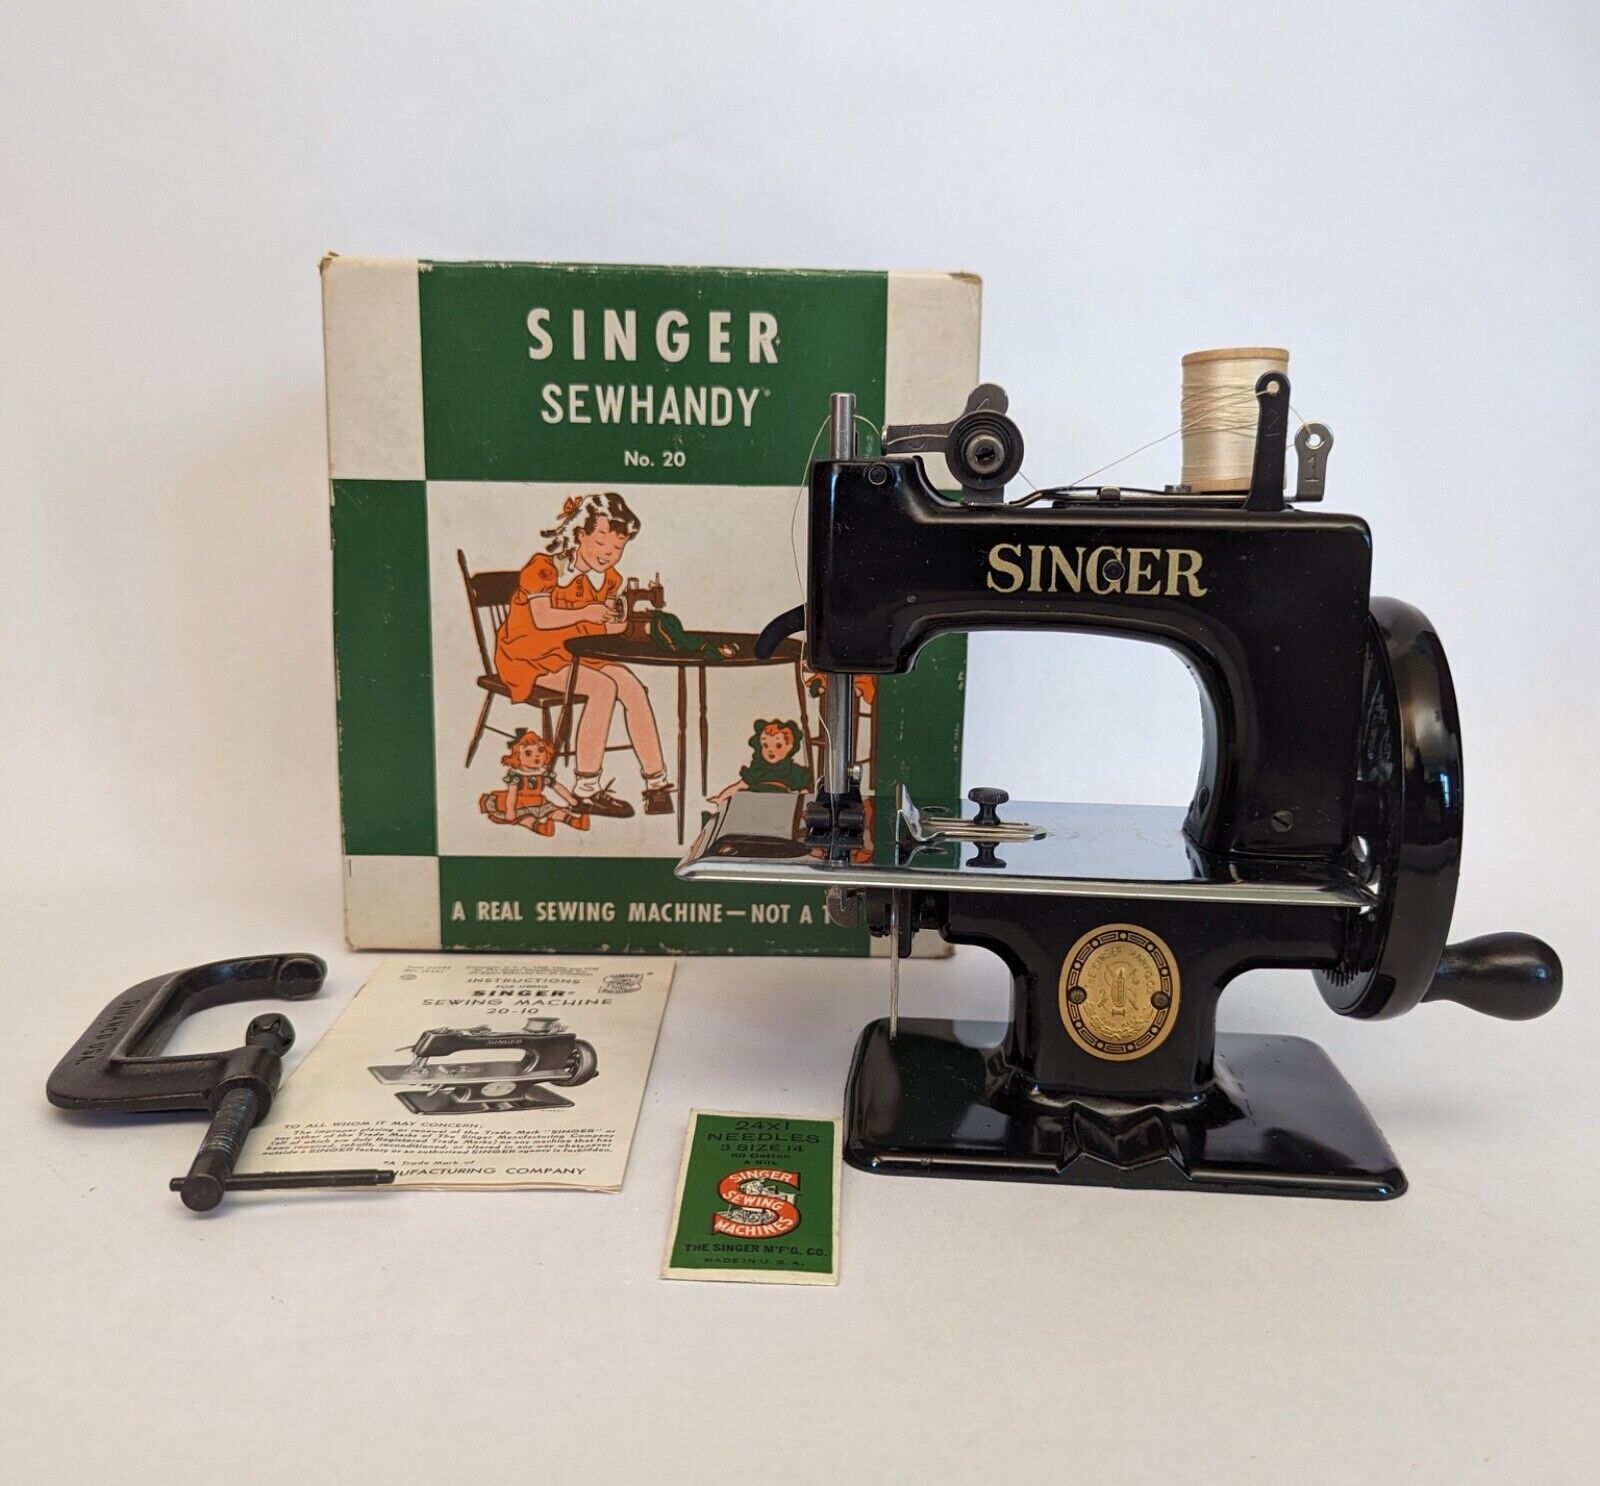 Vintage Singer Sewhandy Model 20 Sewing Machine With Orig. Box & Accessories